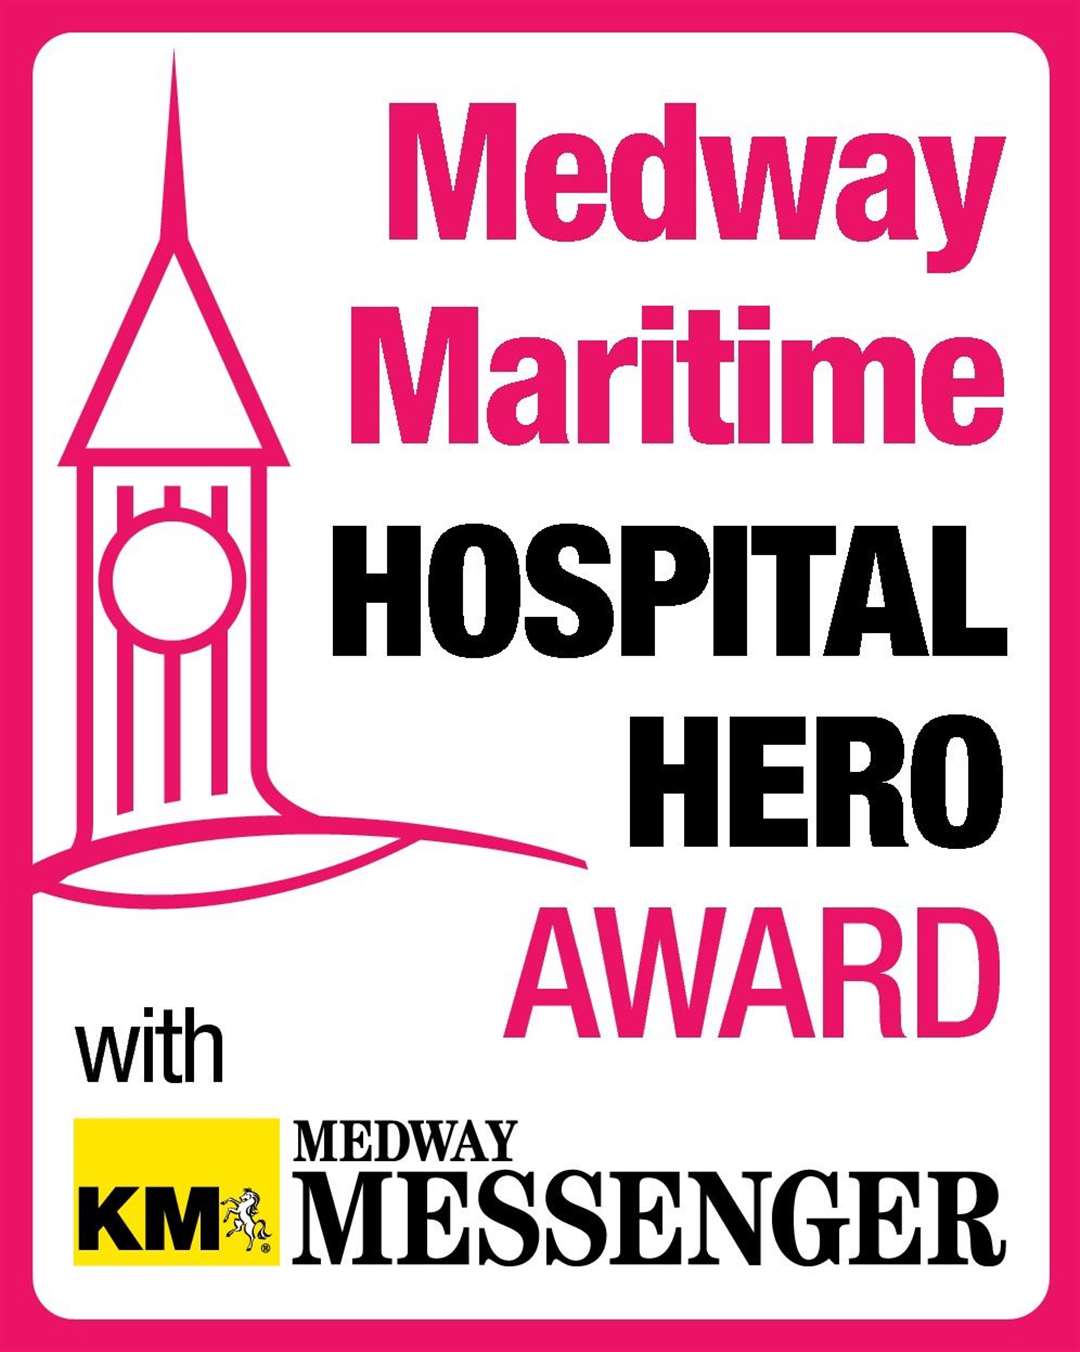 Nominations for the Medway Maritime Hospital Hero award are open